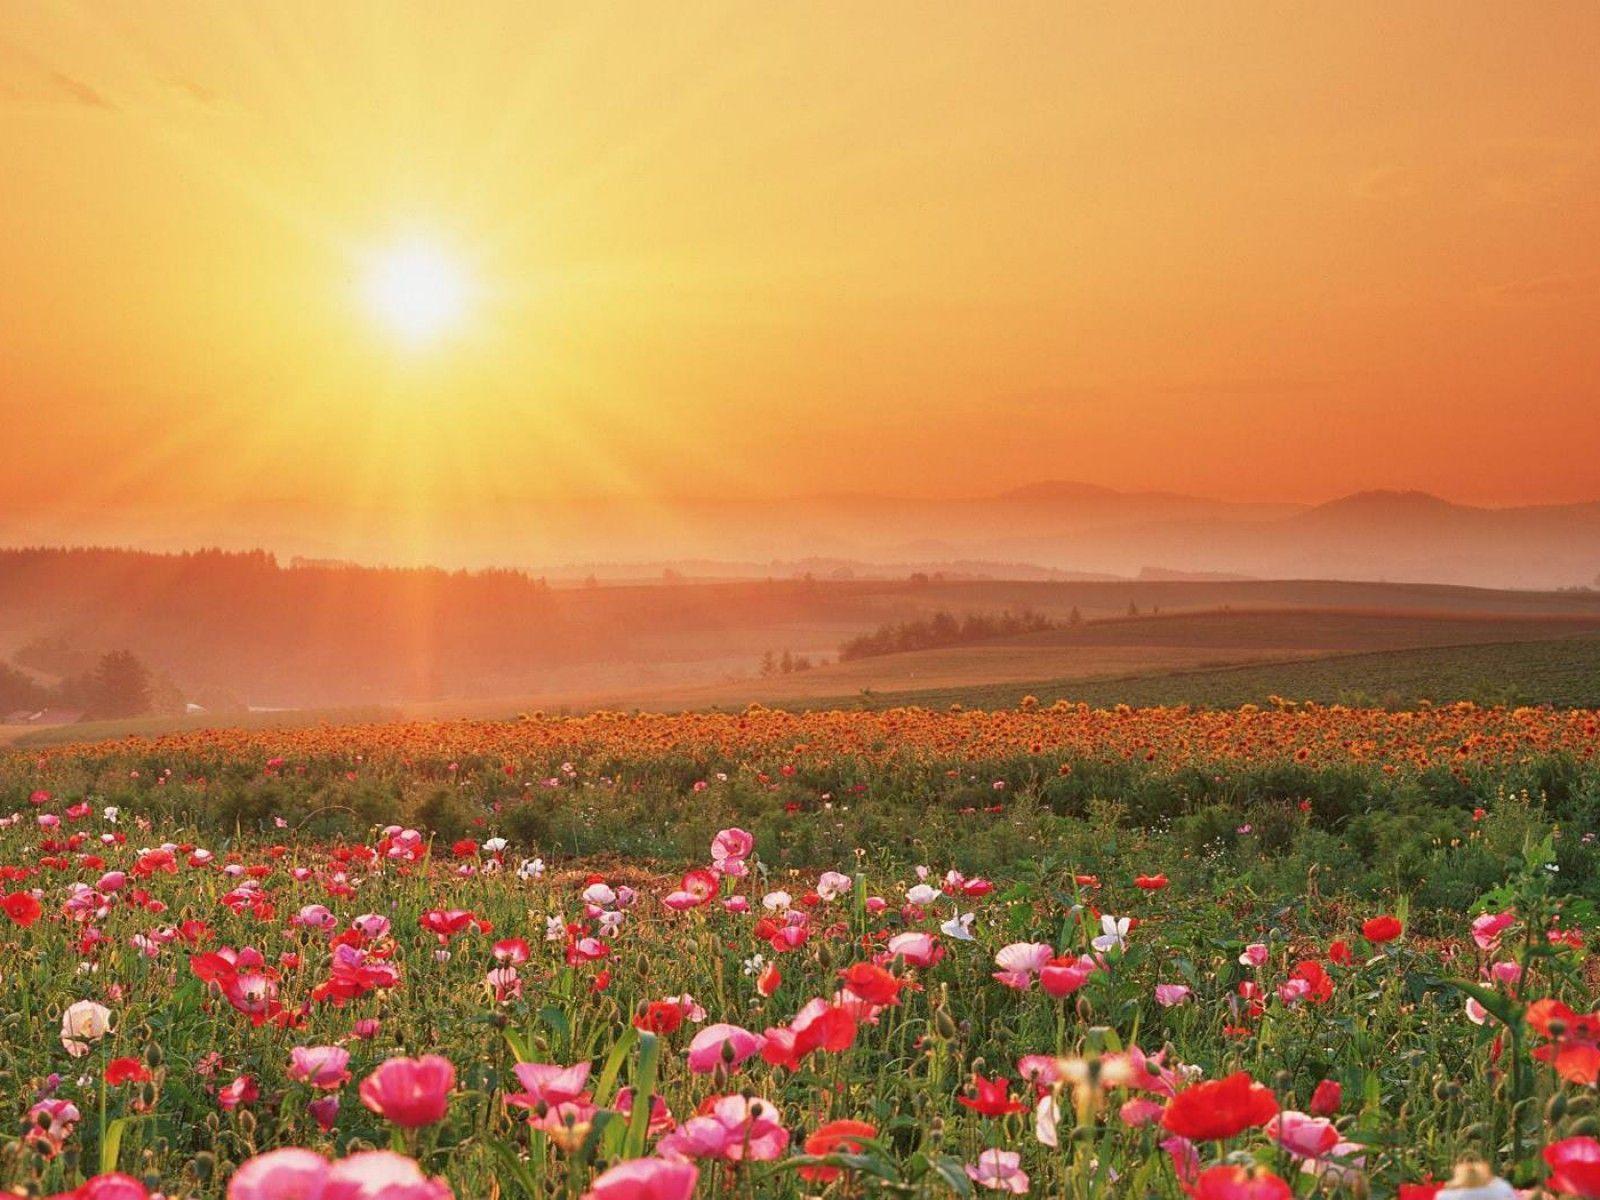 Field Of Flowers Wallpapers - Wallpaper Cave